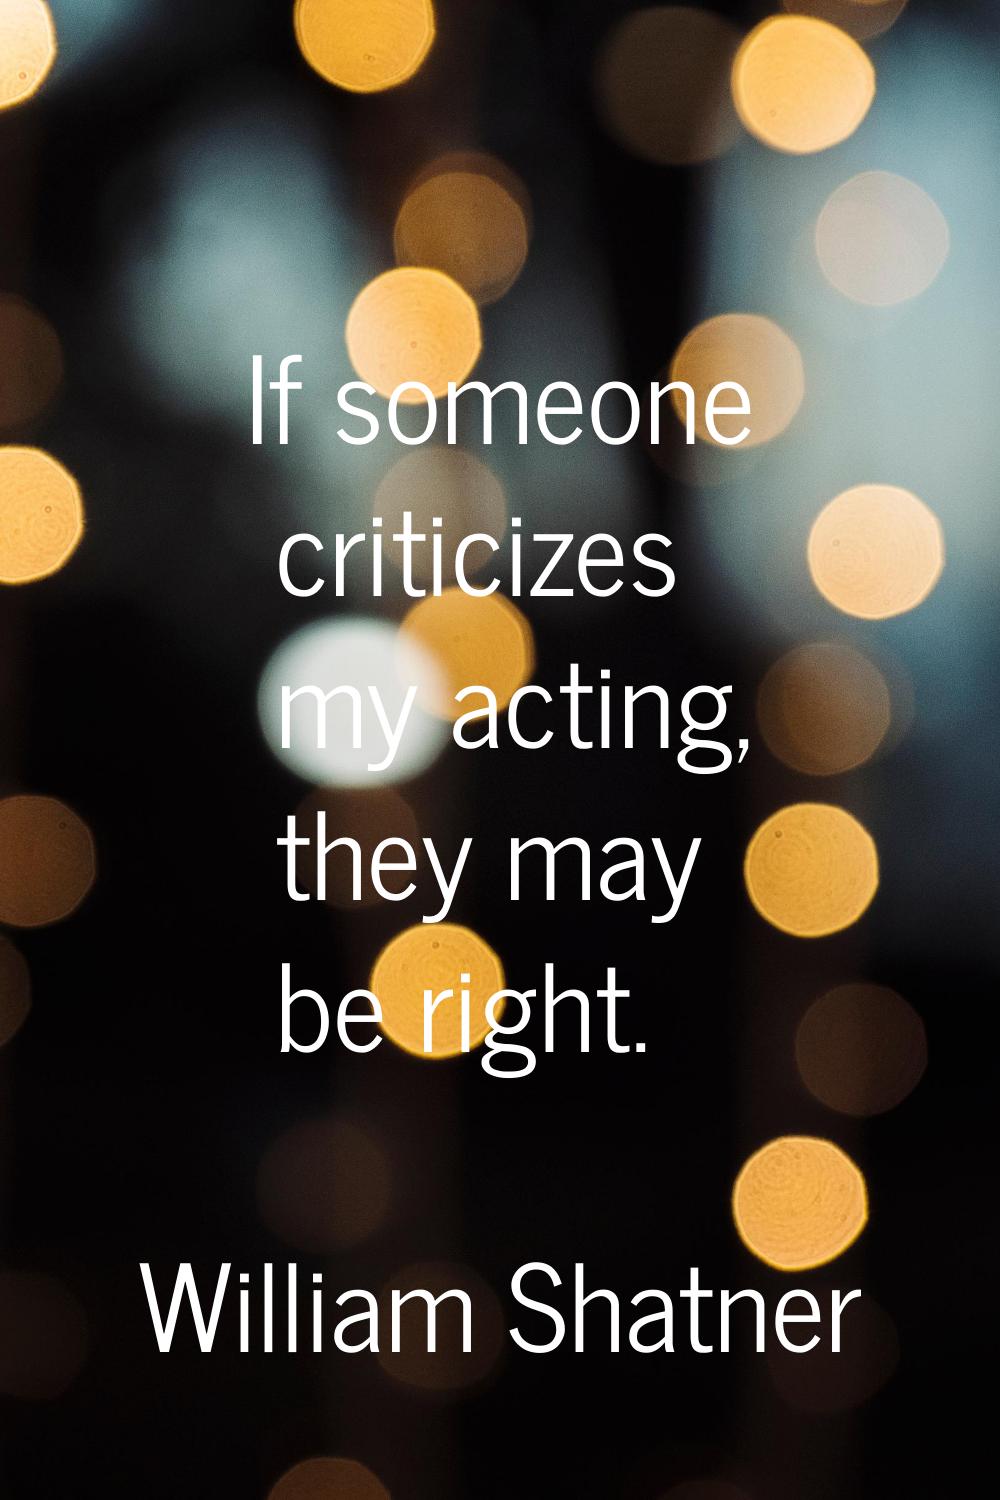 If someone criticizes my acting, they may be right.